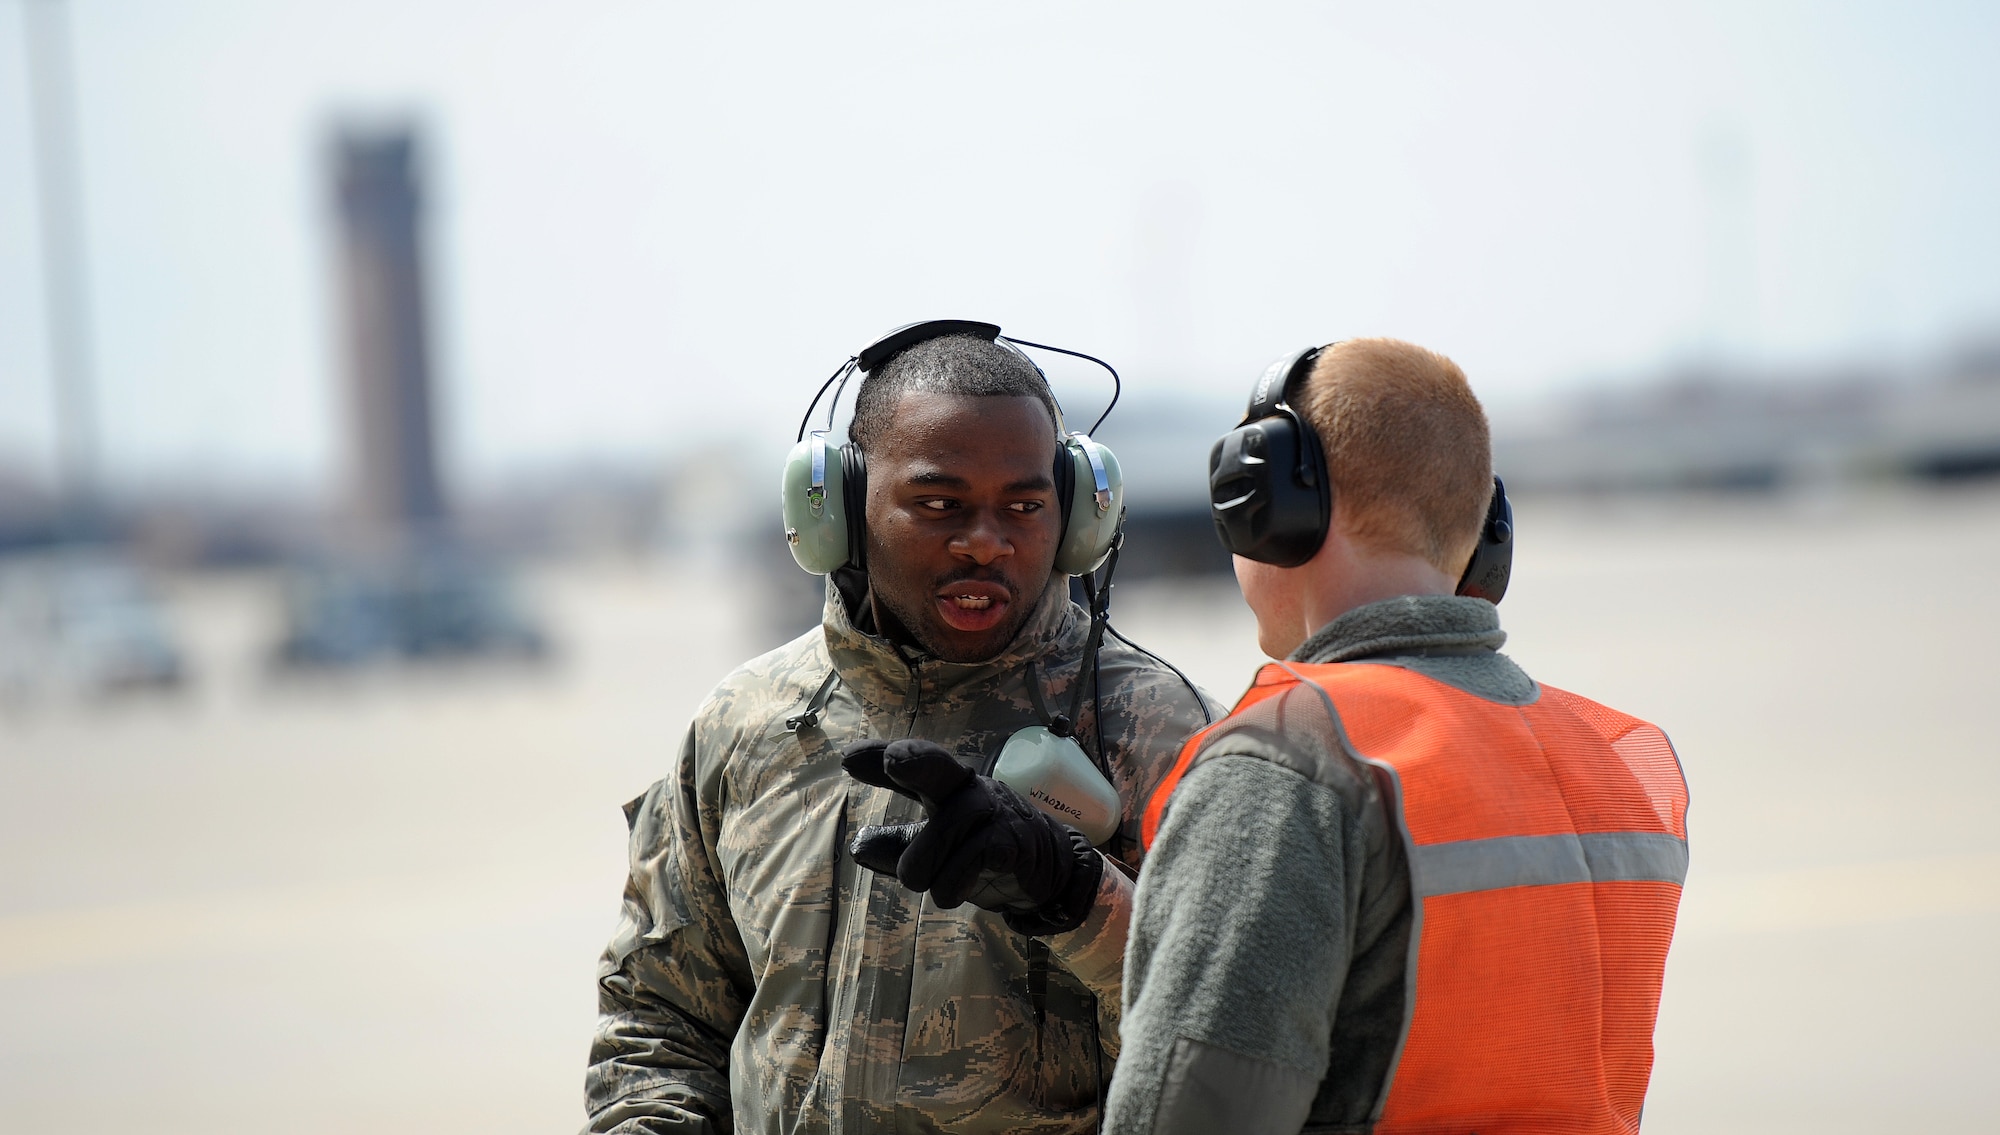 Airman 1st Class Steven McCray, 13th Aircraft Maintenance Unit B-2 Spirit crew chief, and Airman 1st Class James Fulton, 13th Aircraft Maintenance Unit B-2 crew chief, discuss pre-flight procedures at Whiteman Air Force Base, April 5, 2013.  Because of their mission and constant operations tempo, B-2 crew chiefs must remain alert and aware of every maintenance issue involving their assigned aircraft. (U.S. Air Force photo by Staff Sgt. Nick Wilson/Released)